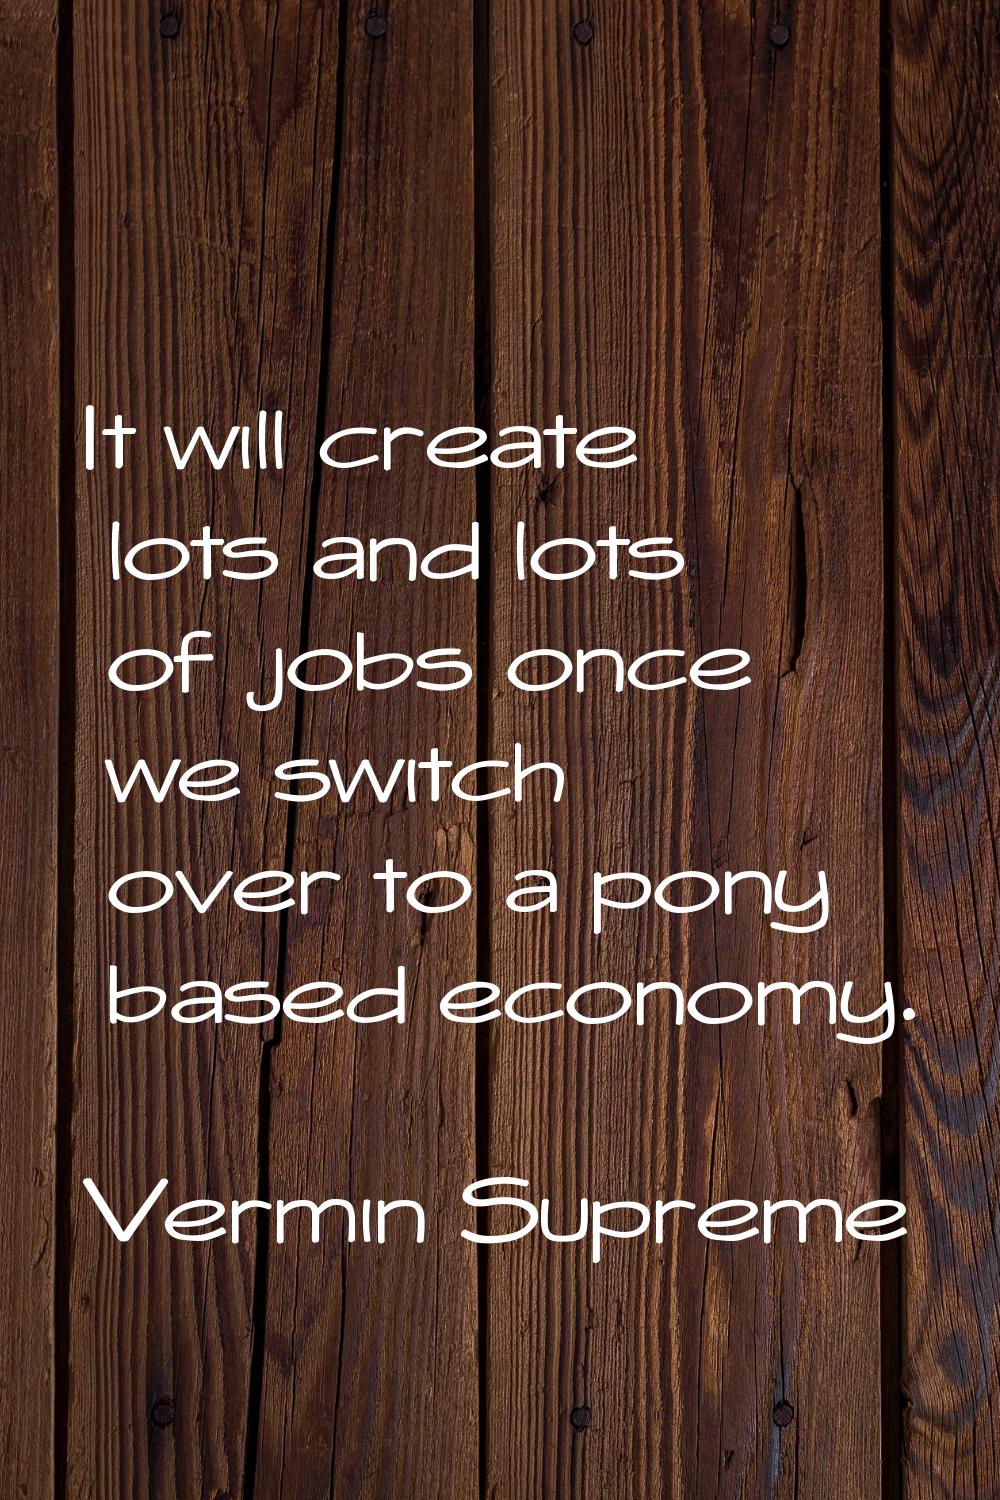 It will create lots and lots of jobs once we switch over to a pony based economy.